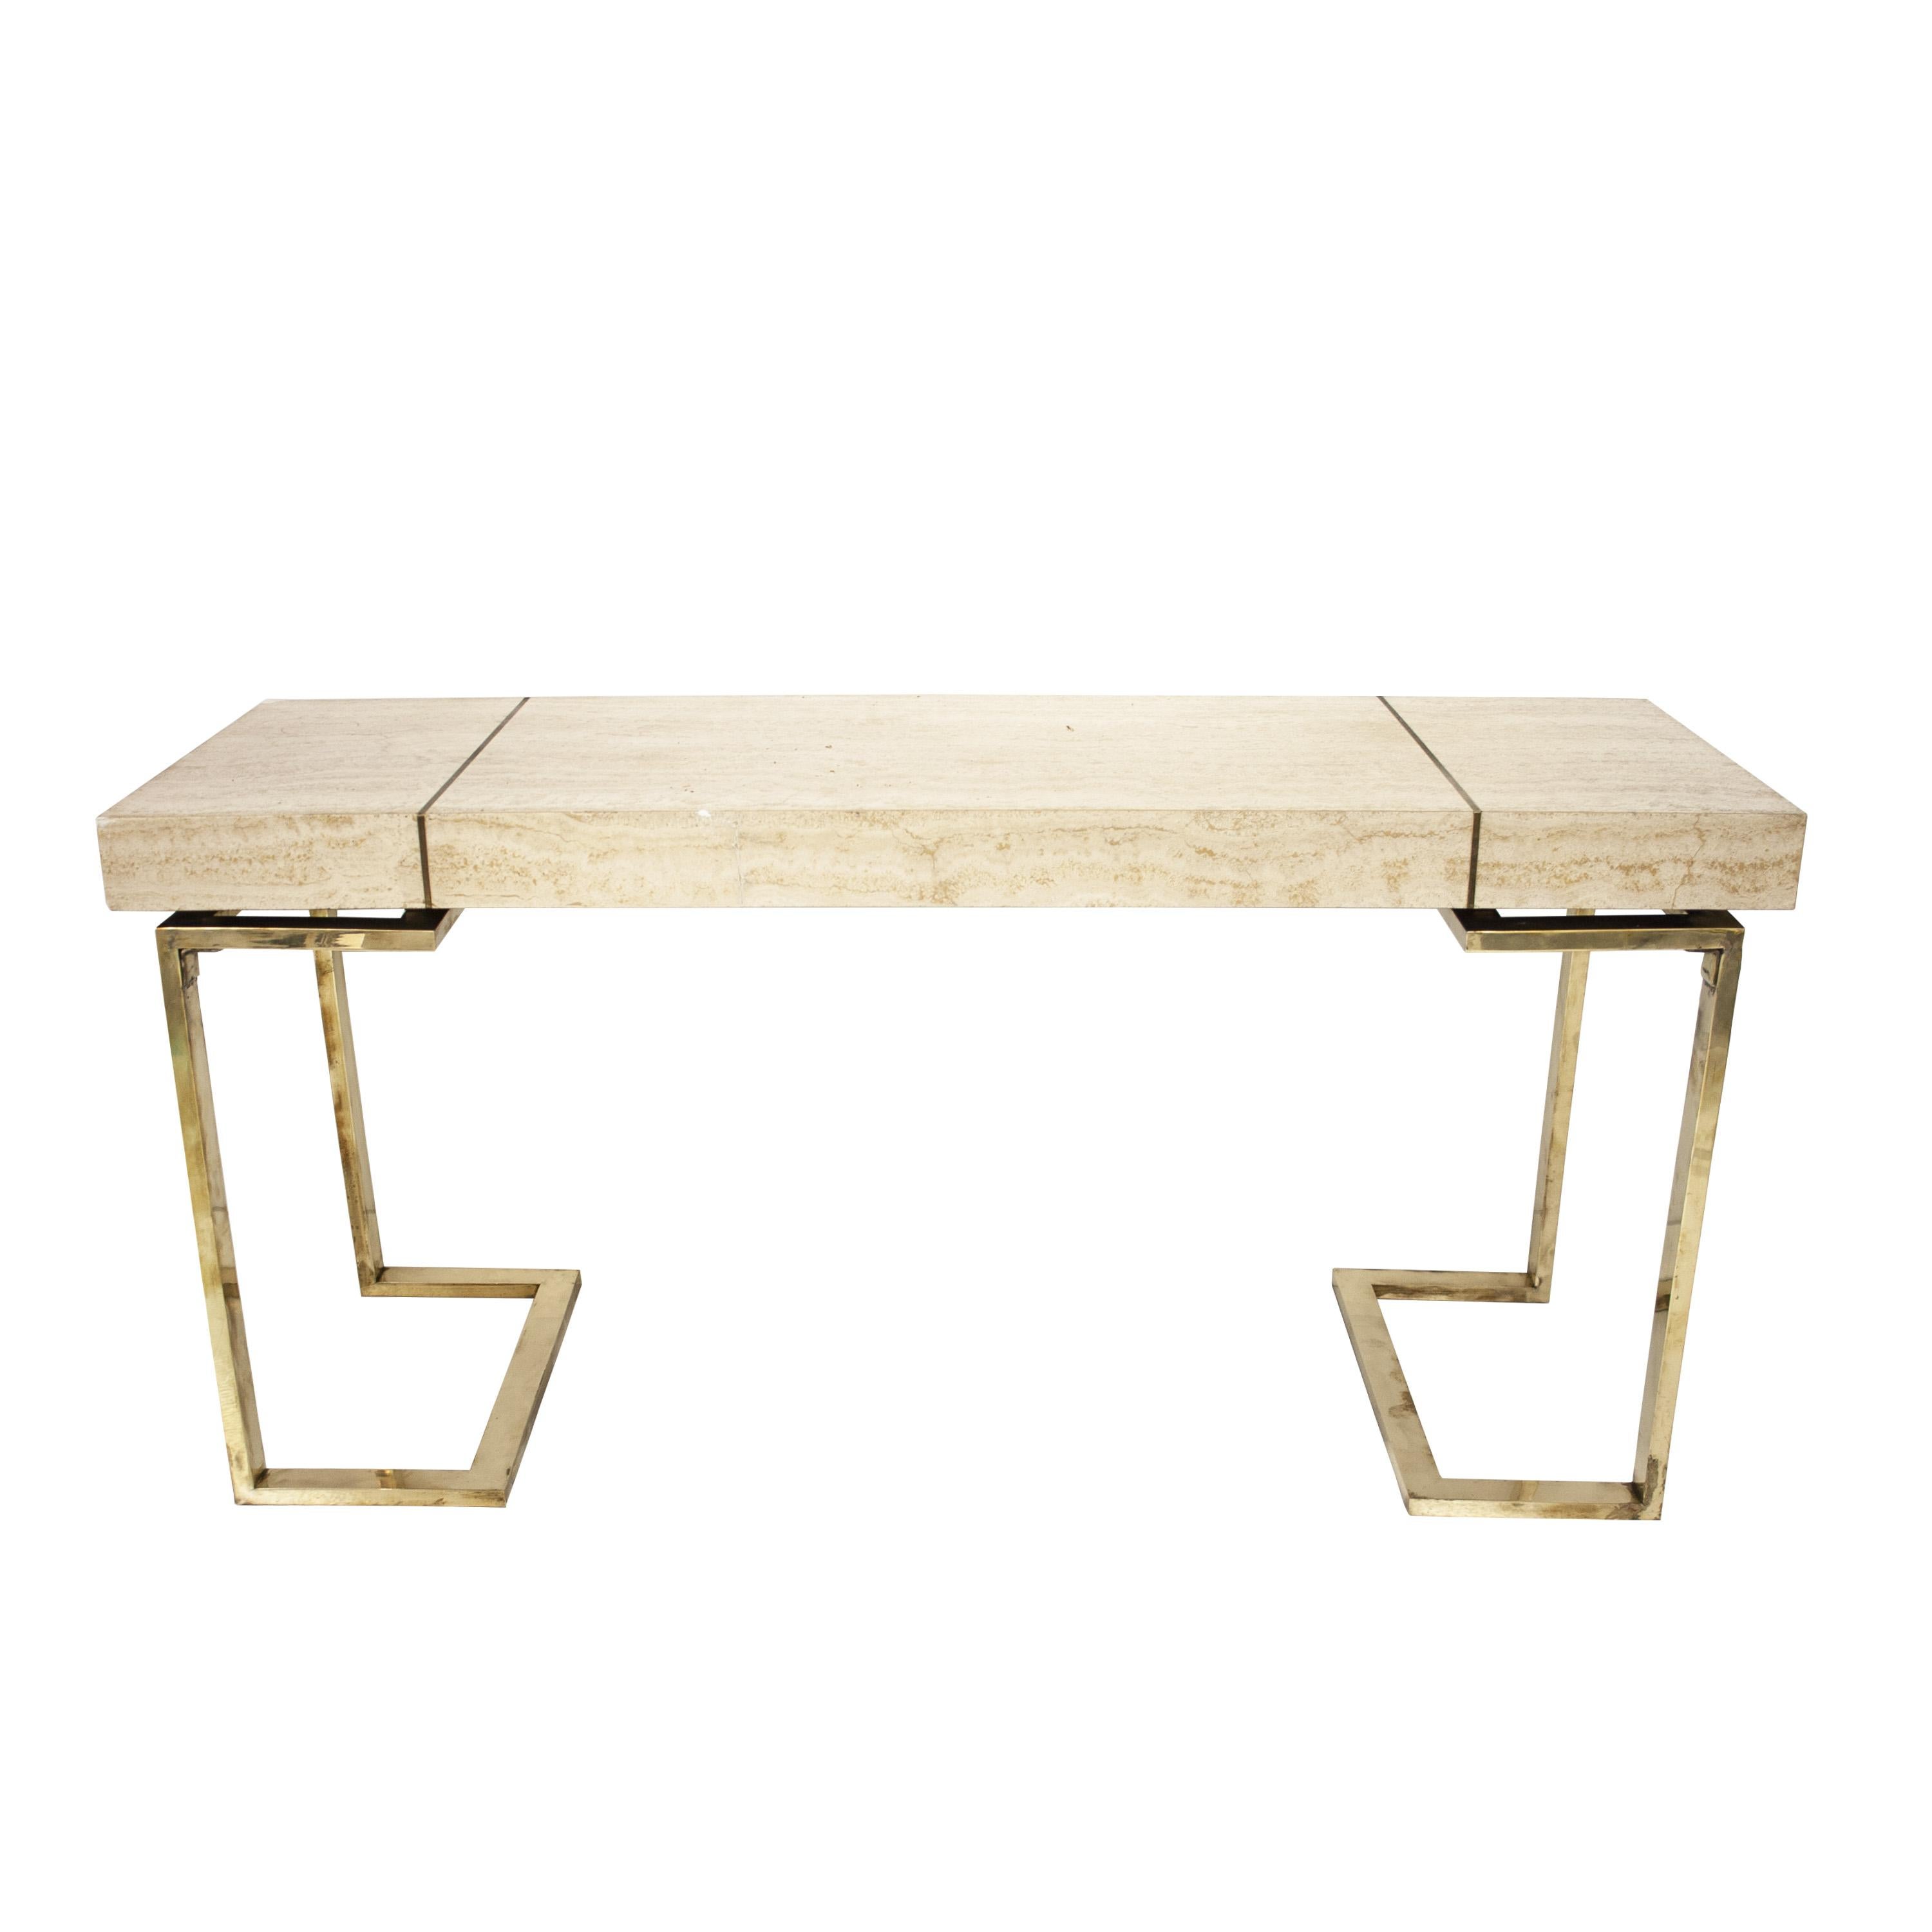 Late 20th Century Modern Console Table with Travertine Top and Brass Chromed Base, 1970, Italia For Sale